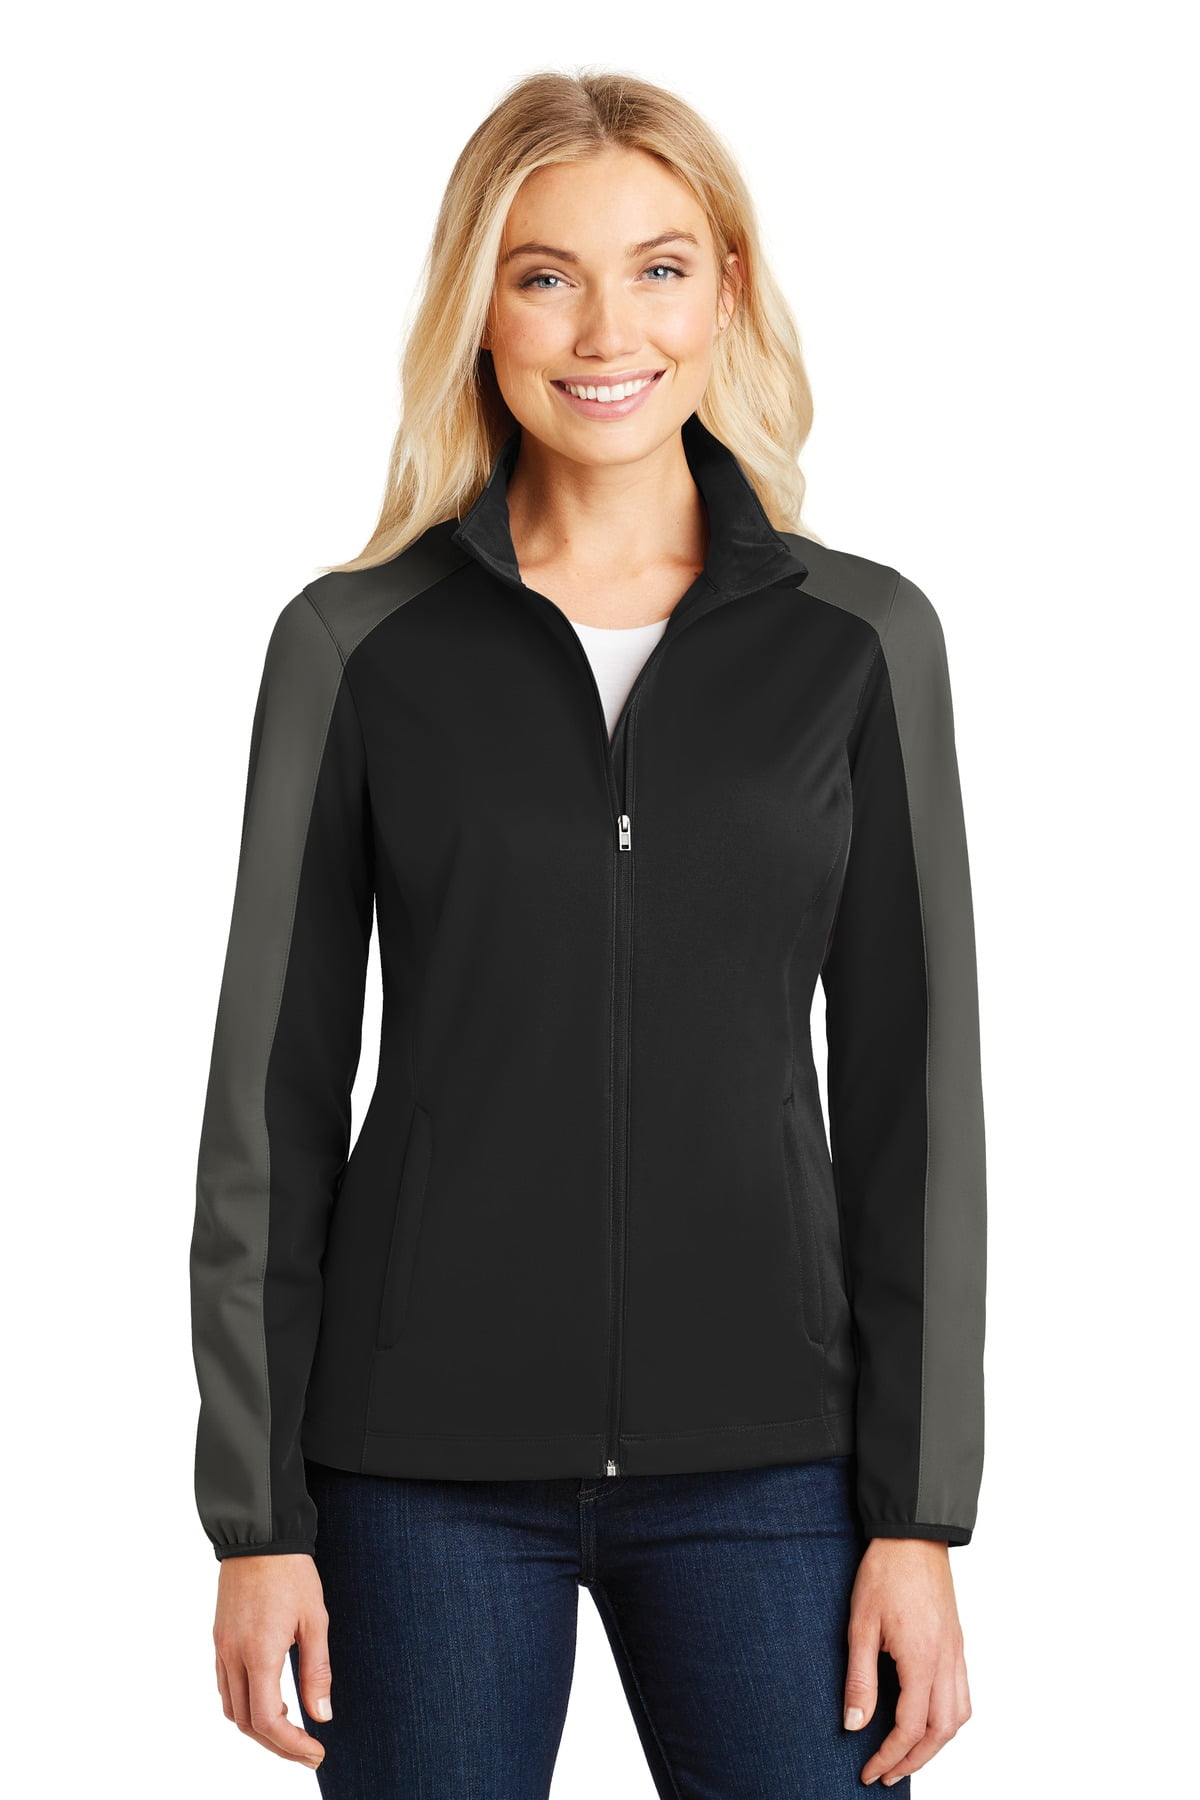 JACKET LADIES MESH LINED SOFT SHELL XS-4XL WIND/WATER RESISTANT COLORBLOCK 